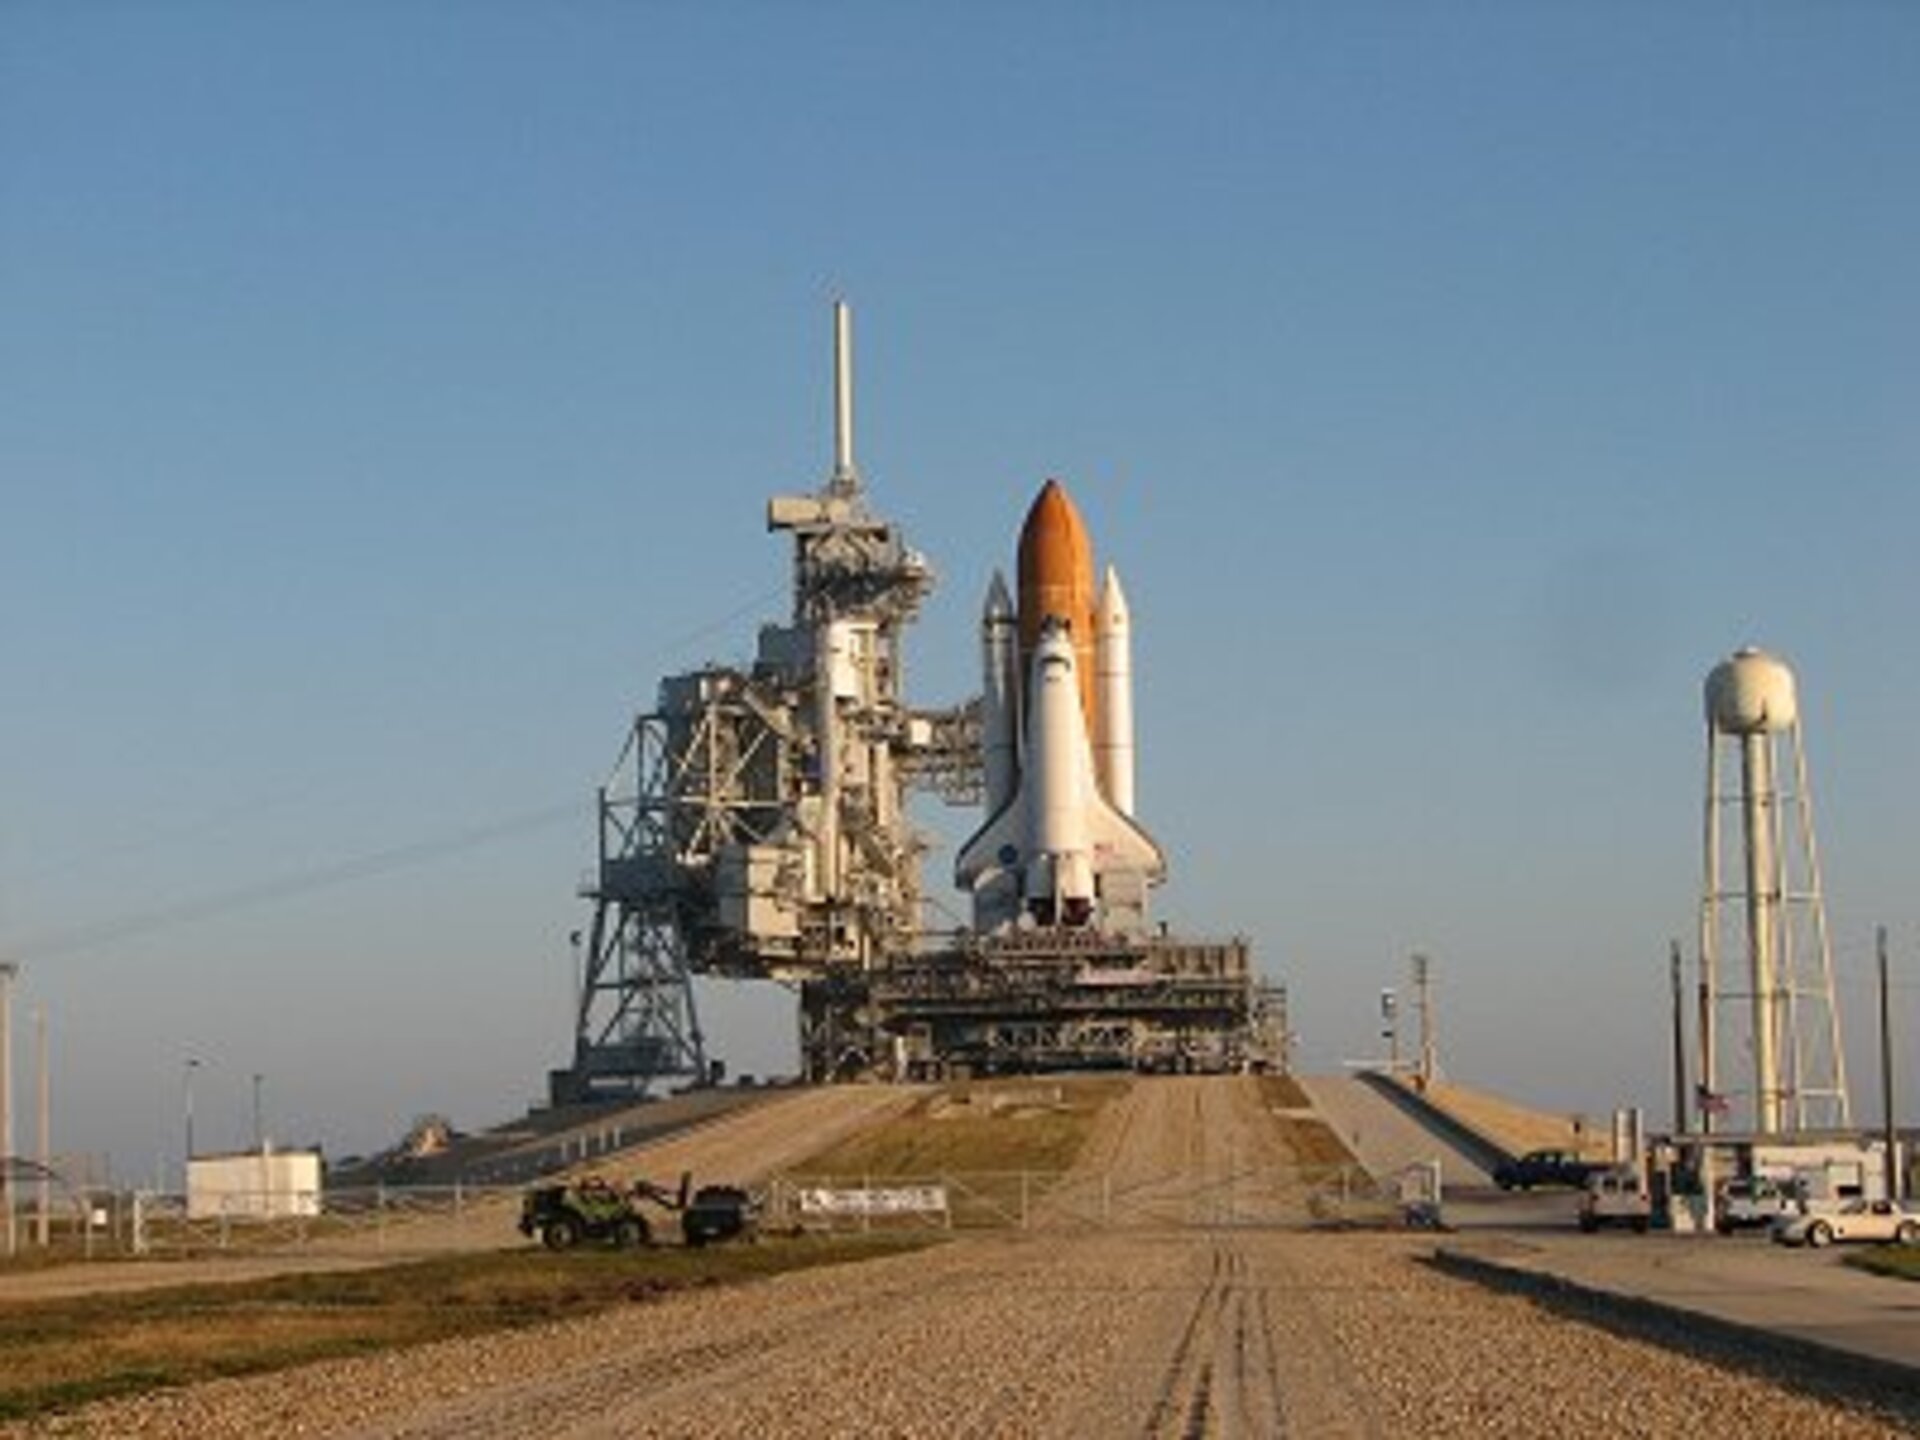 Discovery on the launchpad